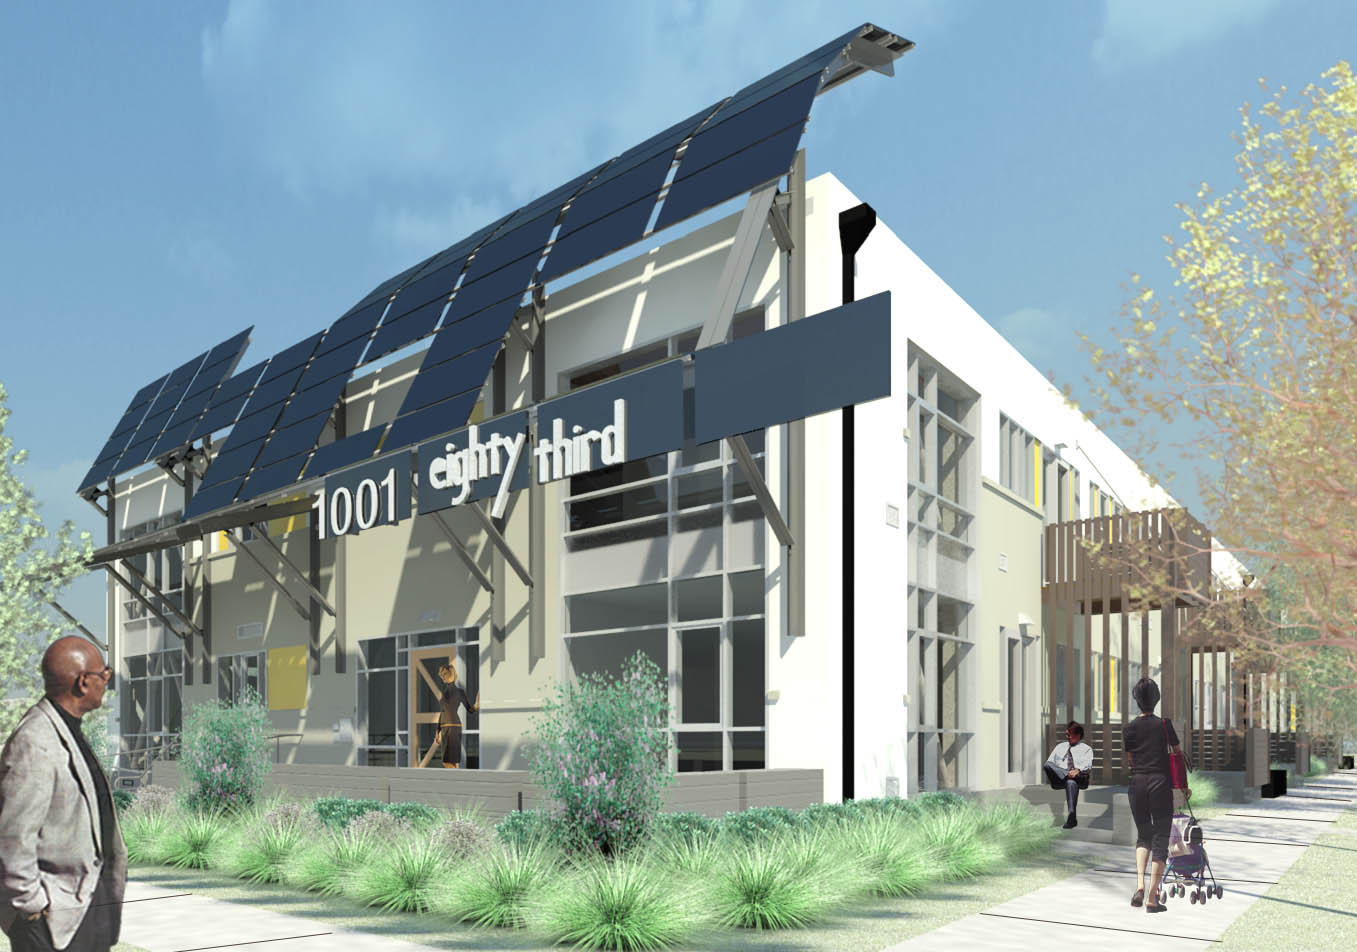 Rendering of the renovated pasta factory housing for Tassafaronga Village in East Oakland, CA. 